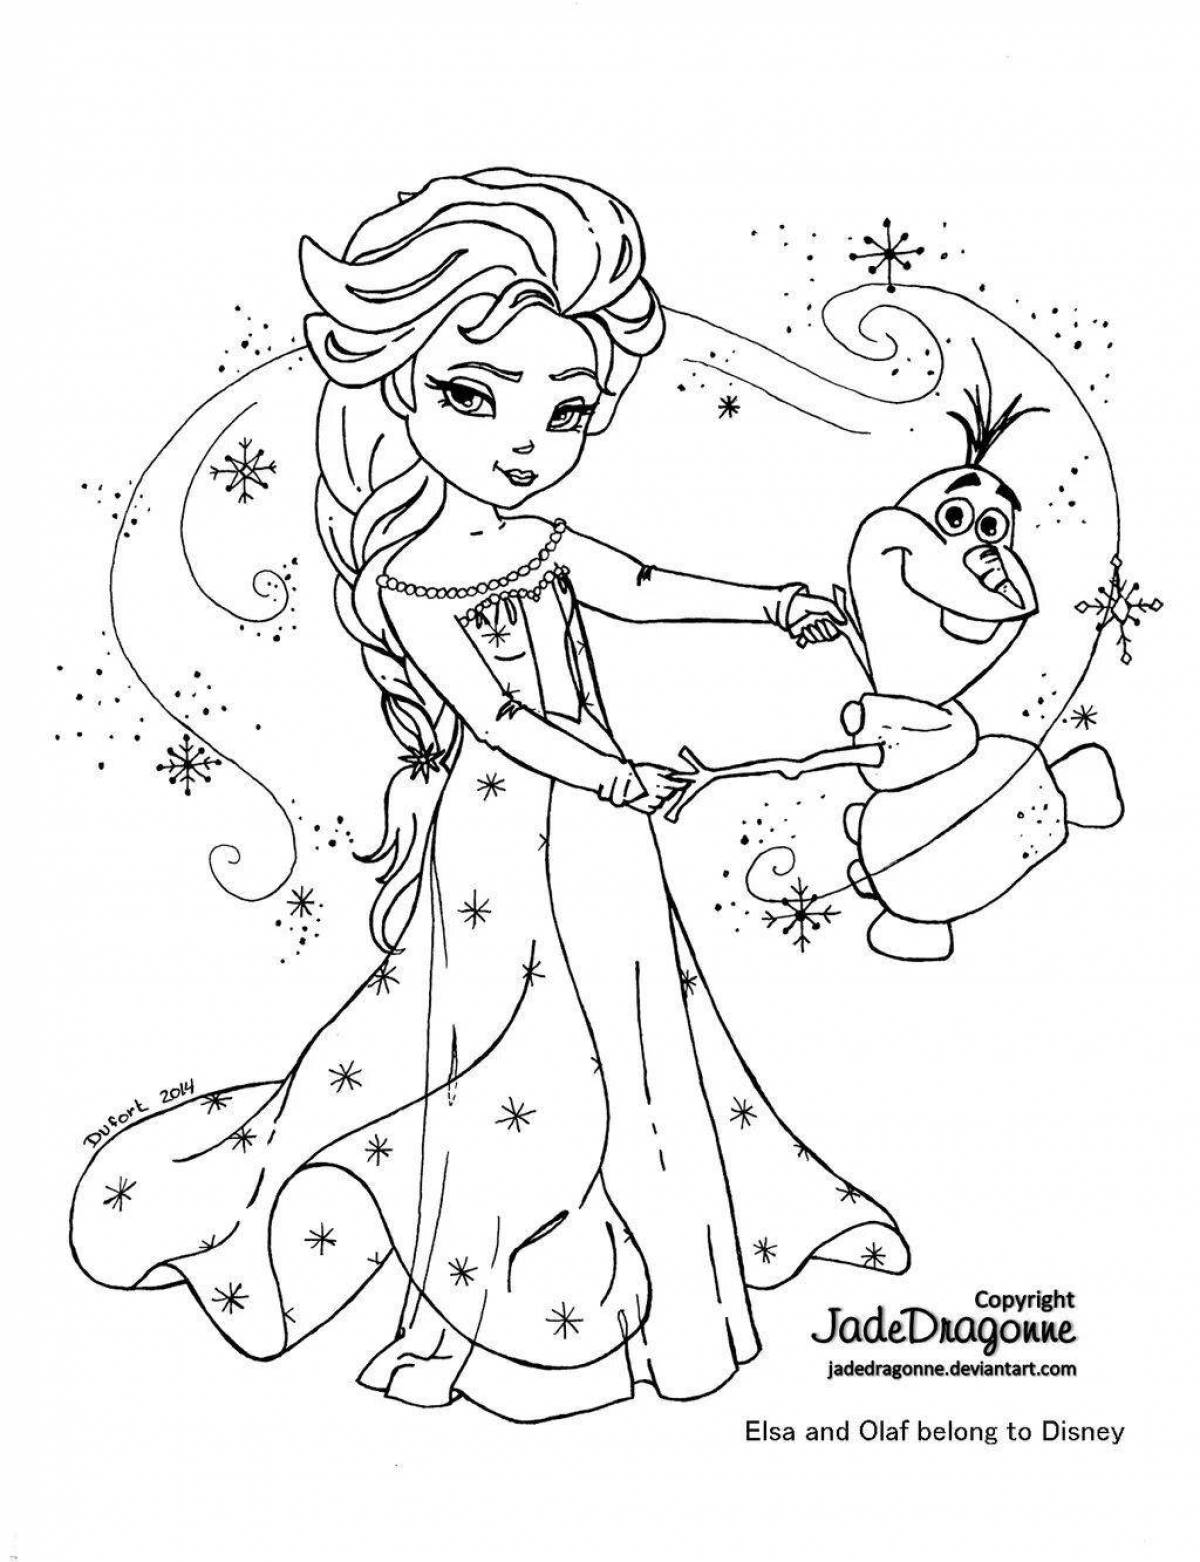 Awesome elsa coloring book for kids 6-7 years old